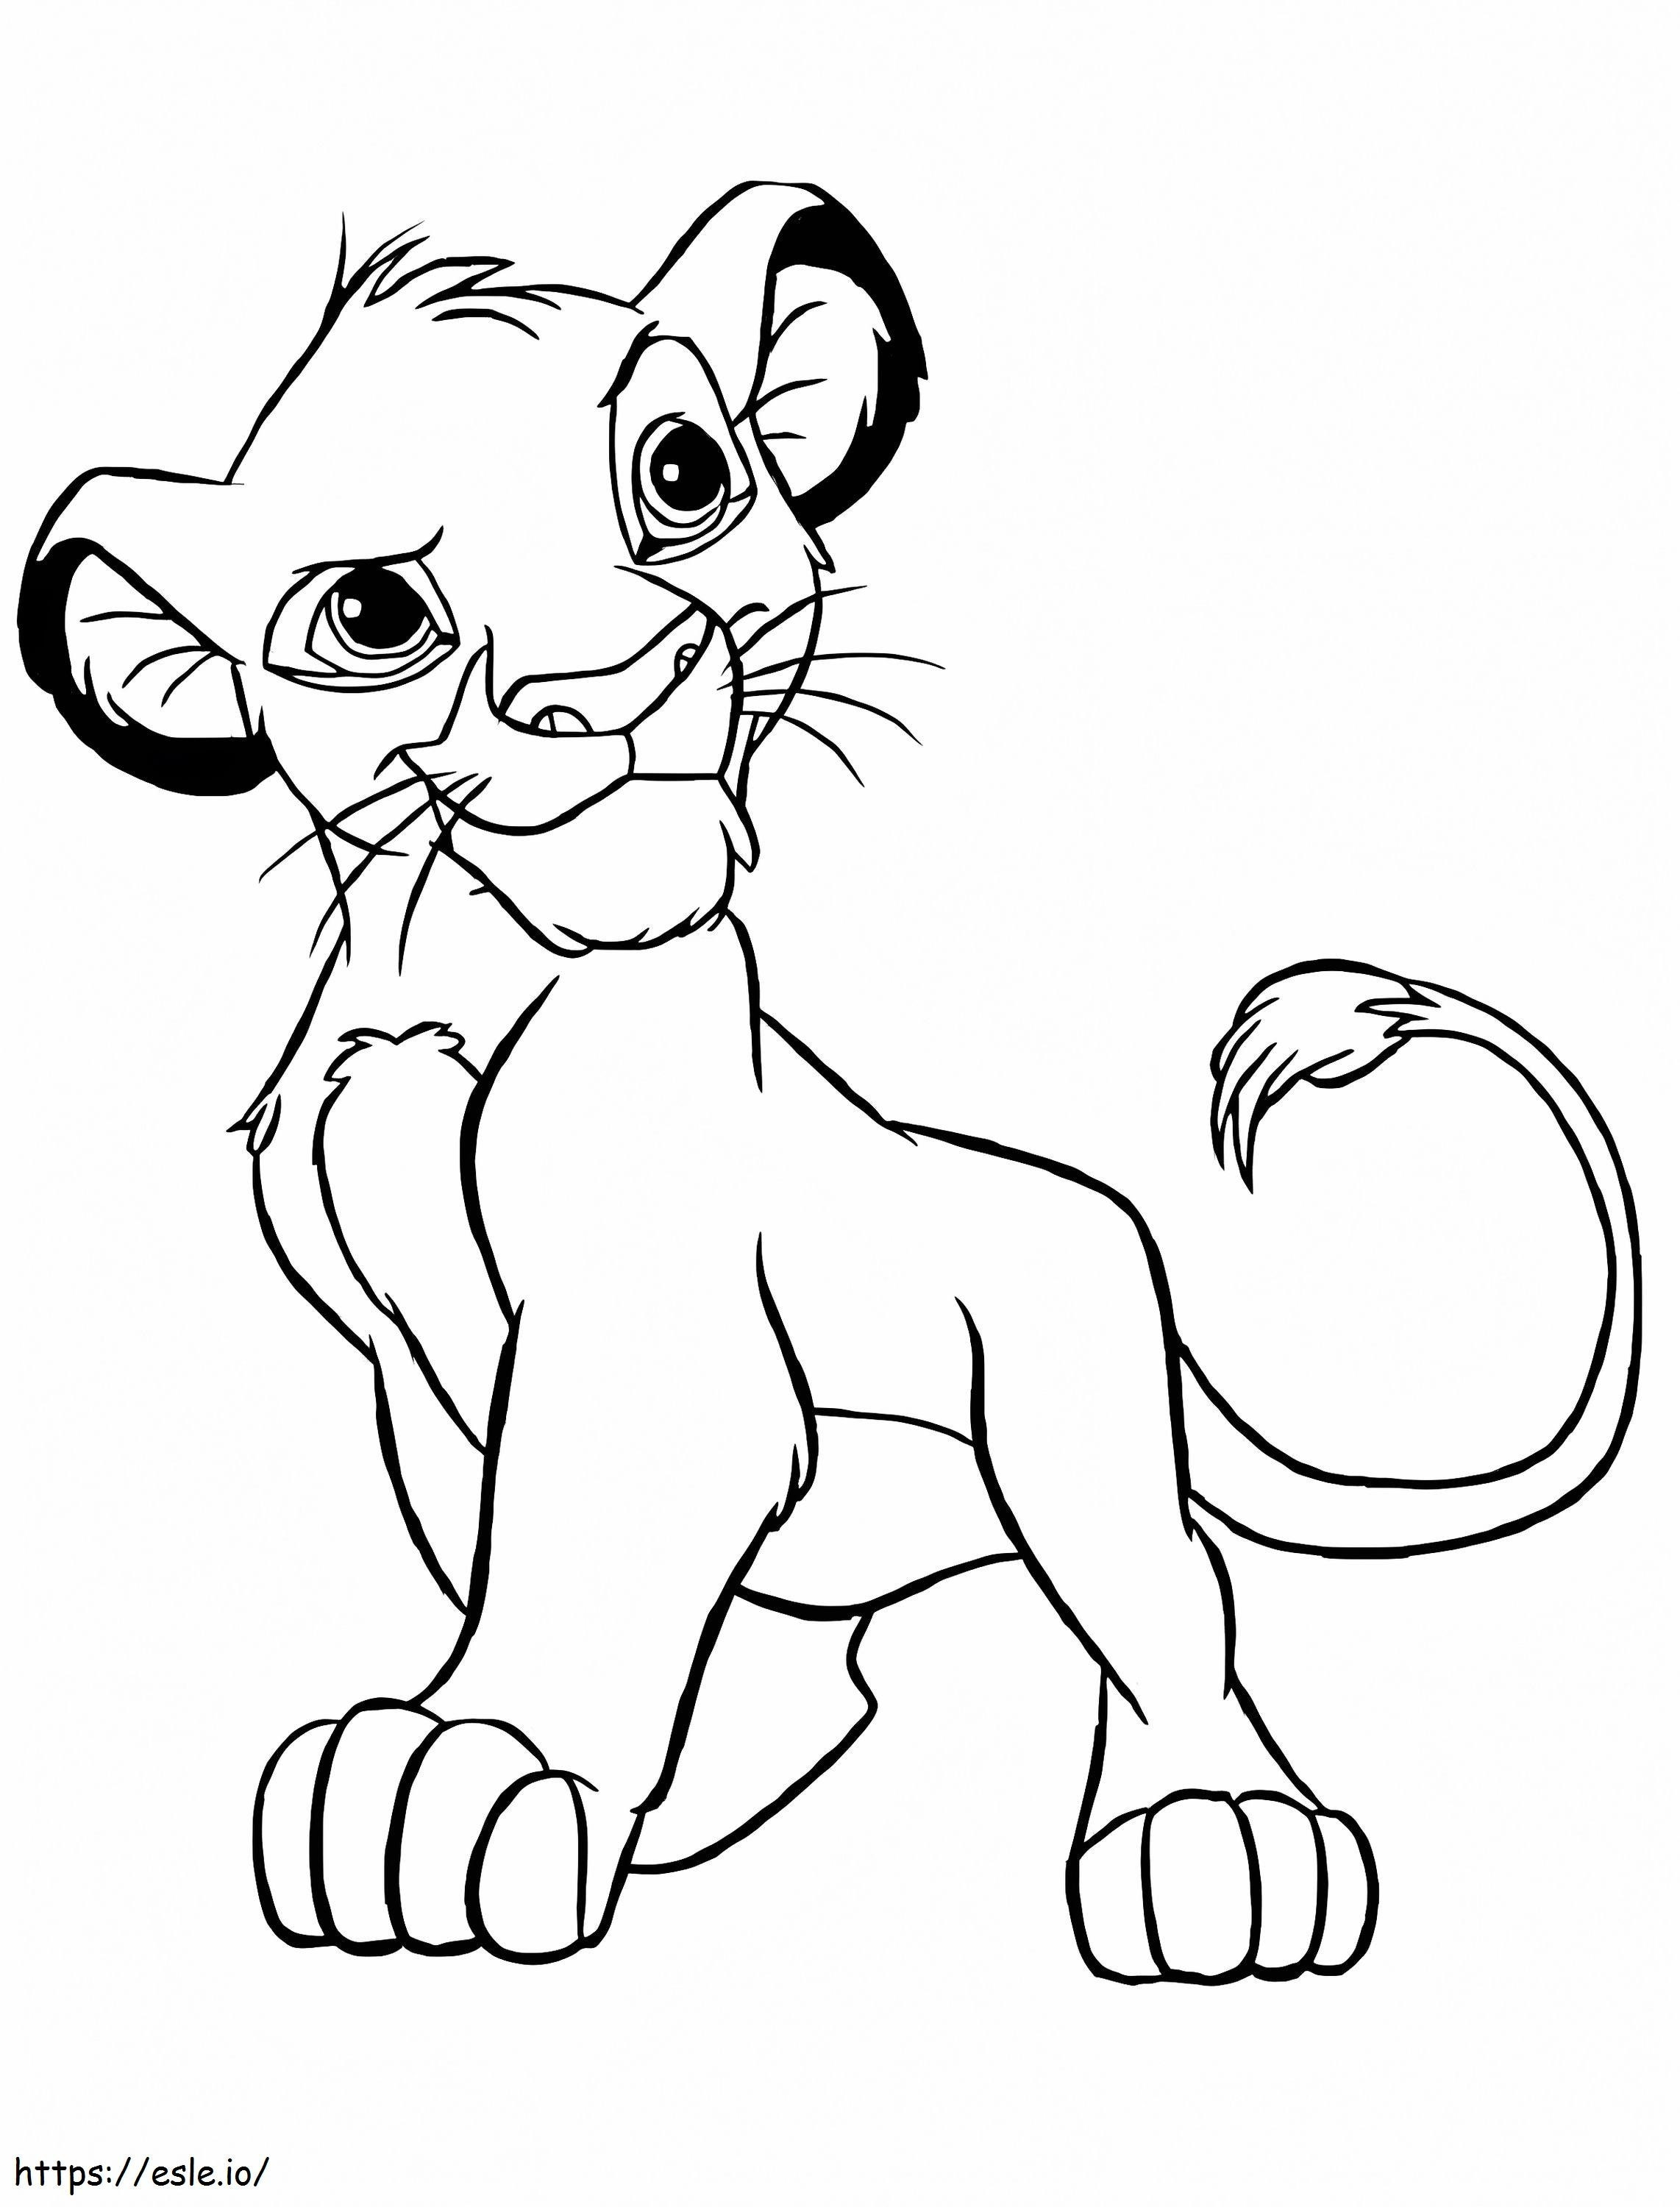 Simba Standing coloring page